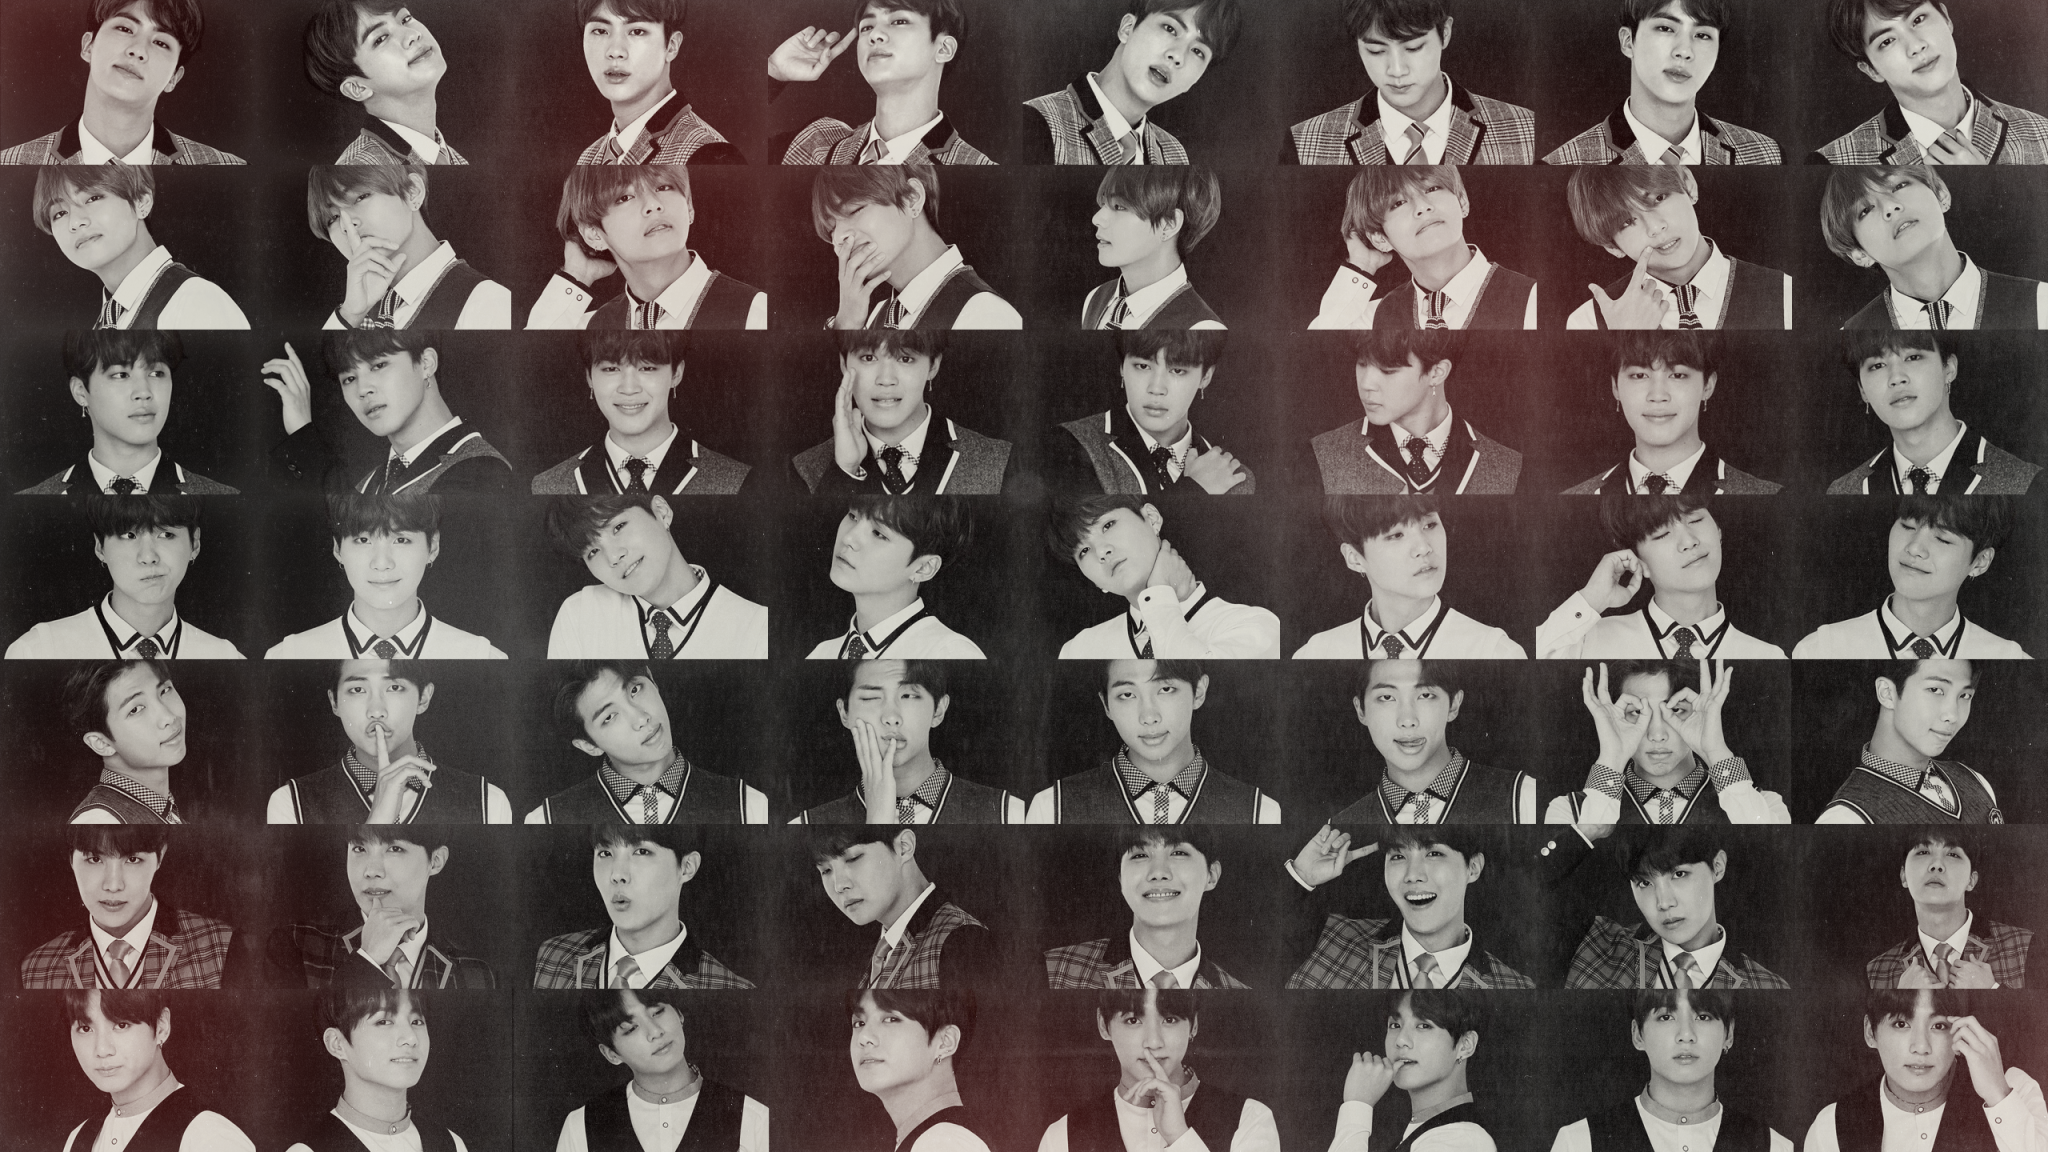 BTS_Wallpaper_FeelinAliveDesigns_004.png